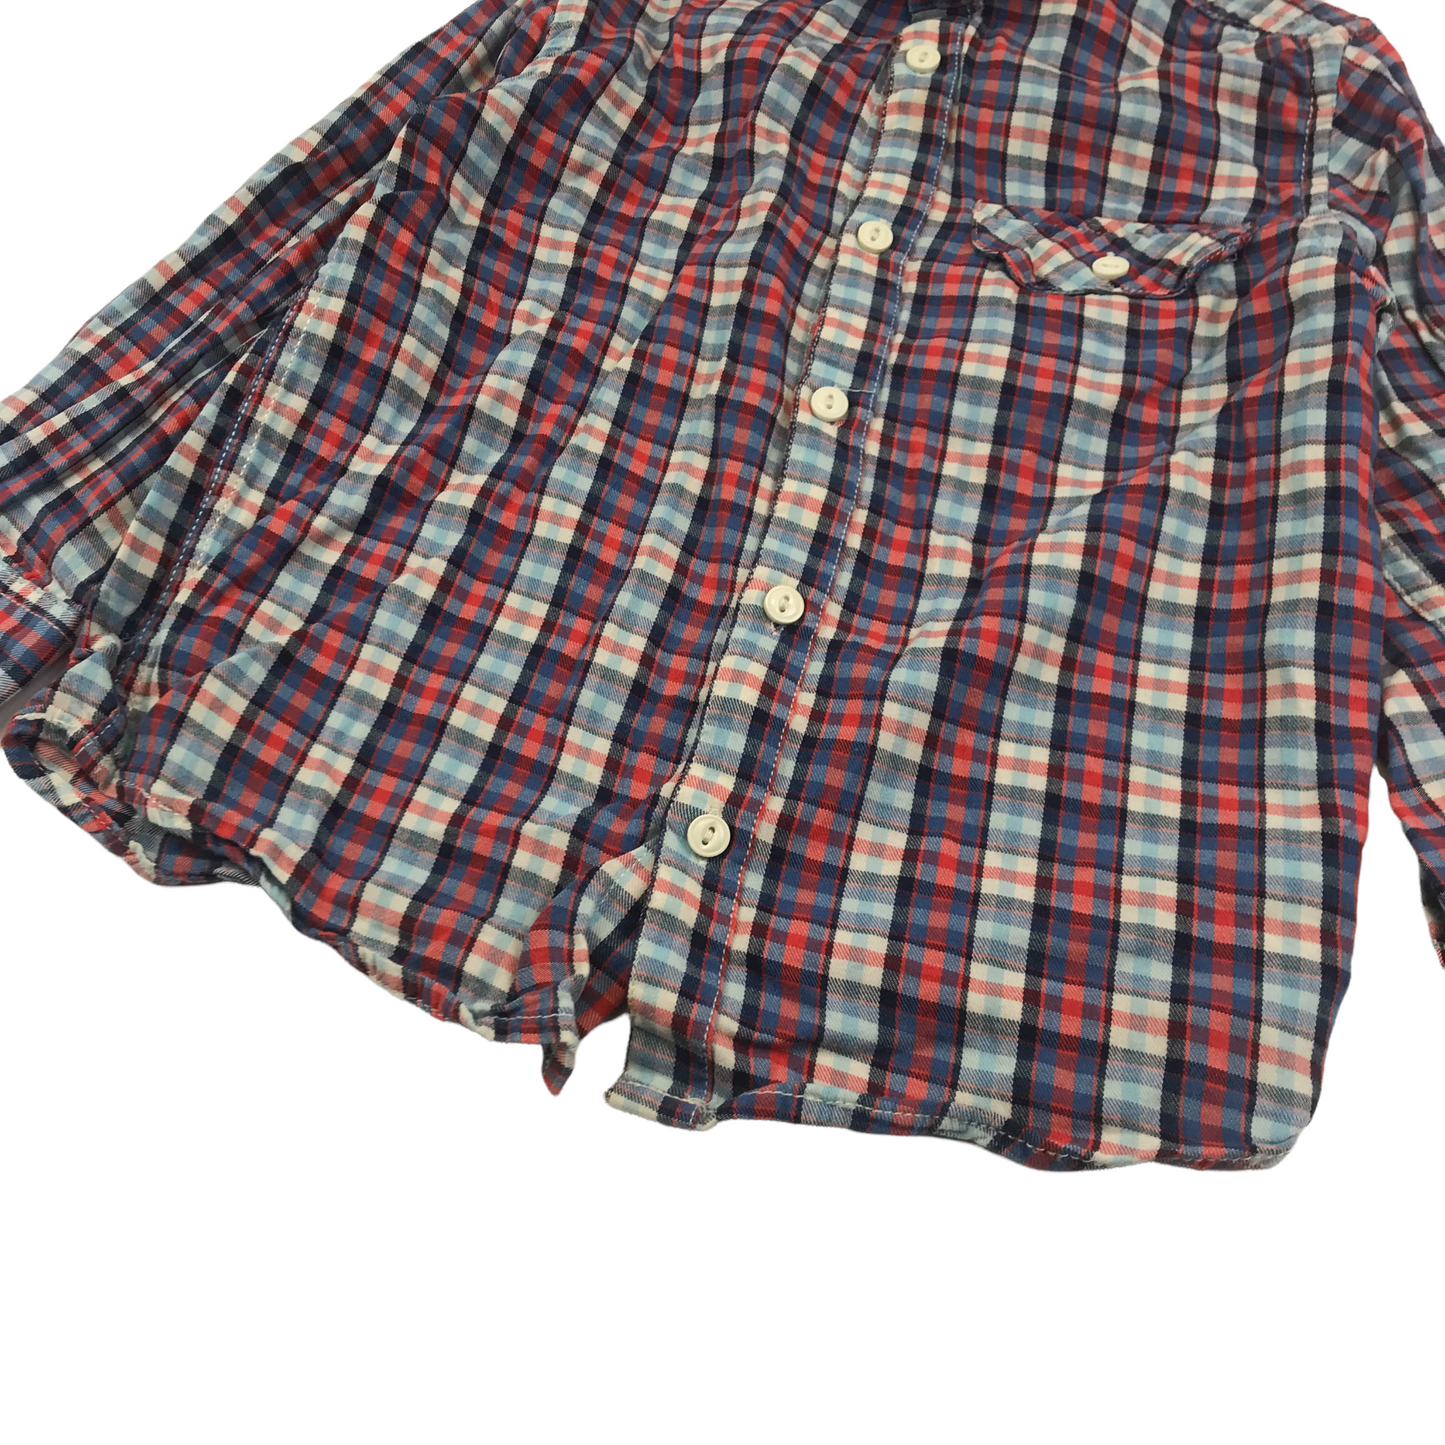 John Lewis Red and Blue Checked Shirt Age 6